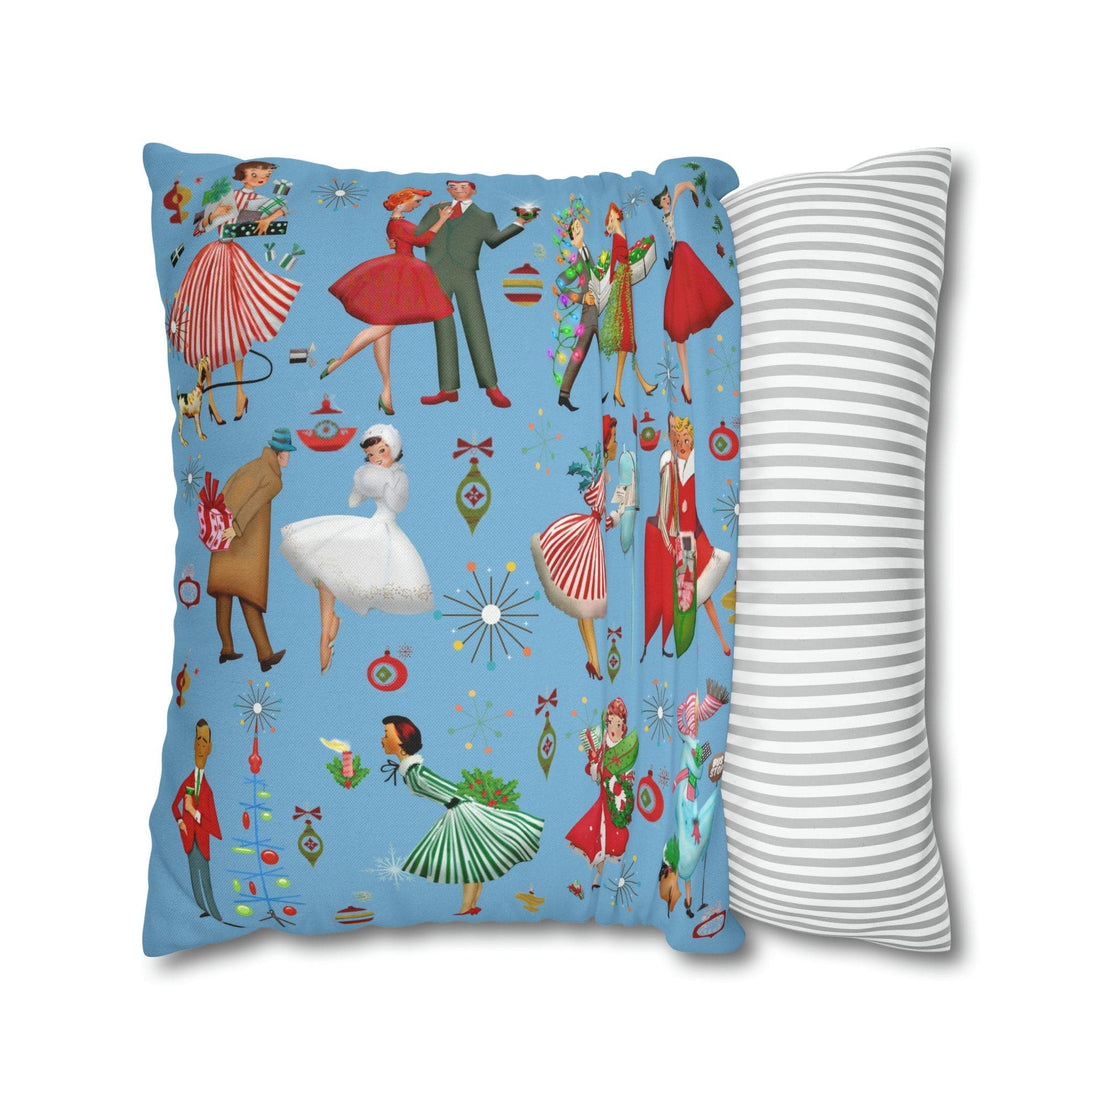 Kate McEnroe New York Retro Vintage 1950s Kitsch Christmas Throw Pillow Cover, Vintage Housewives, Couples Xmas Card Inspired Art, MCM Holiday DecorThrow Pillow Covers45149189858819535962